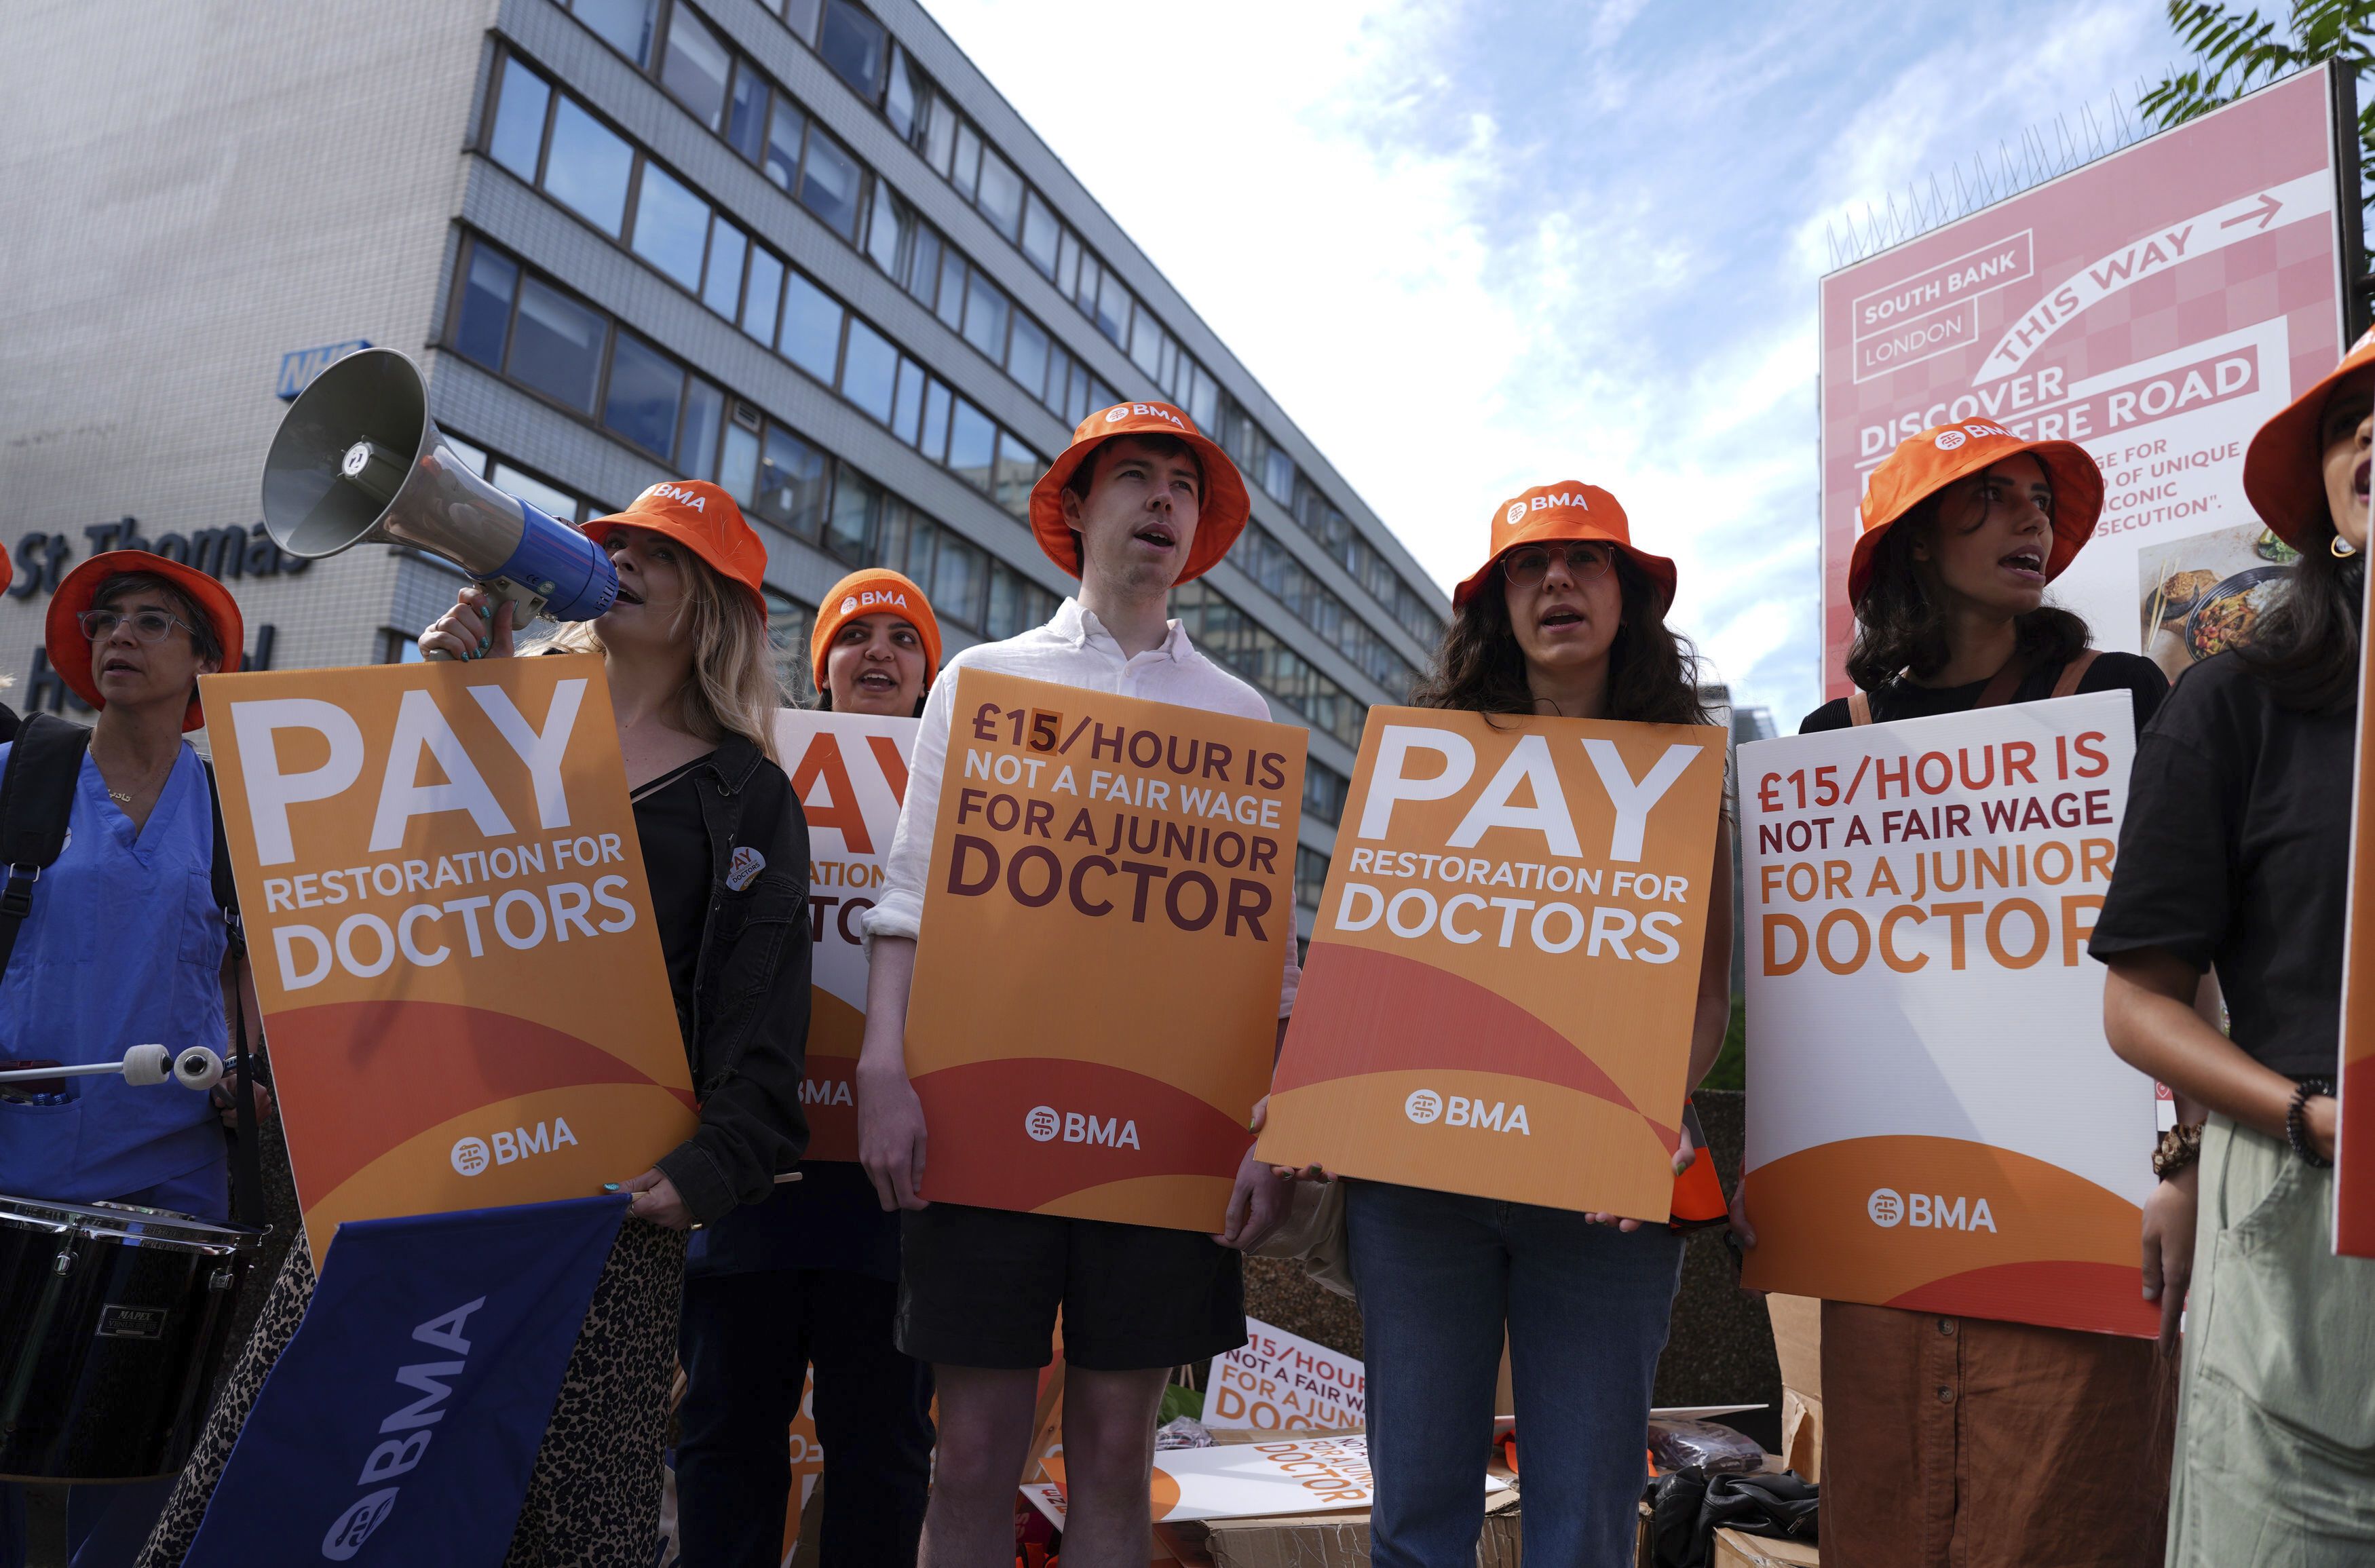 Thousands of doctors go on strike in England a week before the UK general election thumbnail